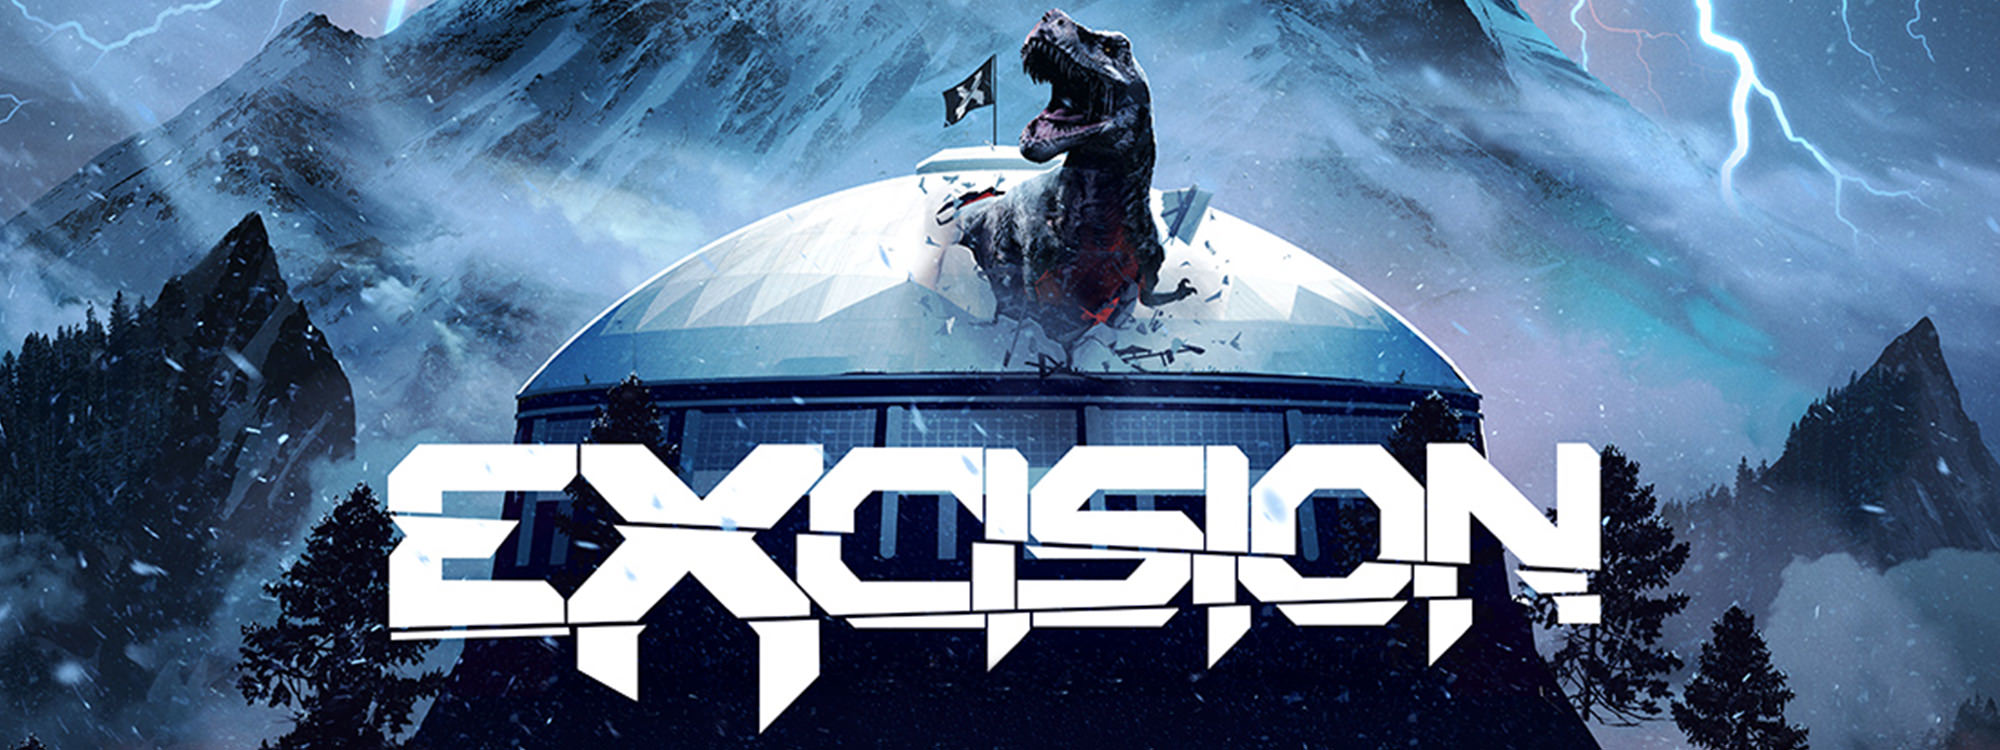 Excision en The Thunderdome